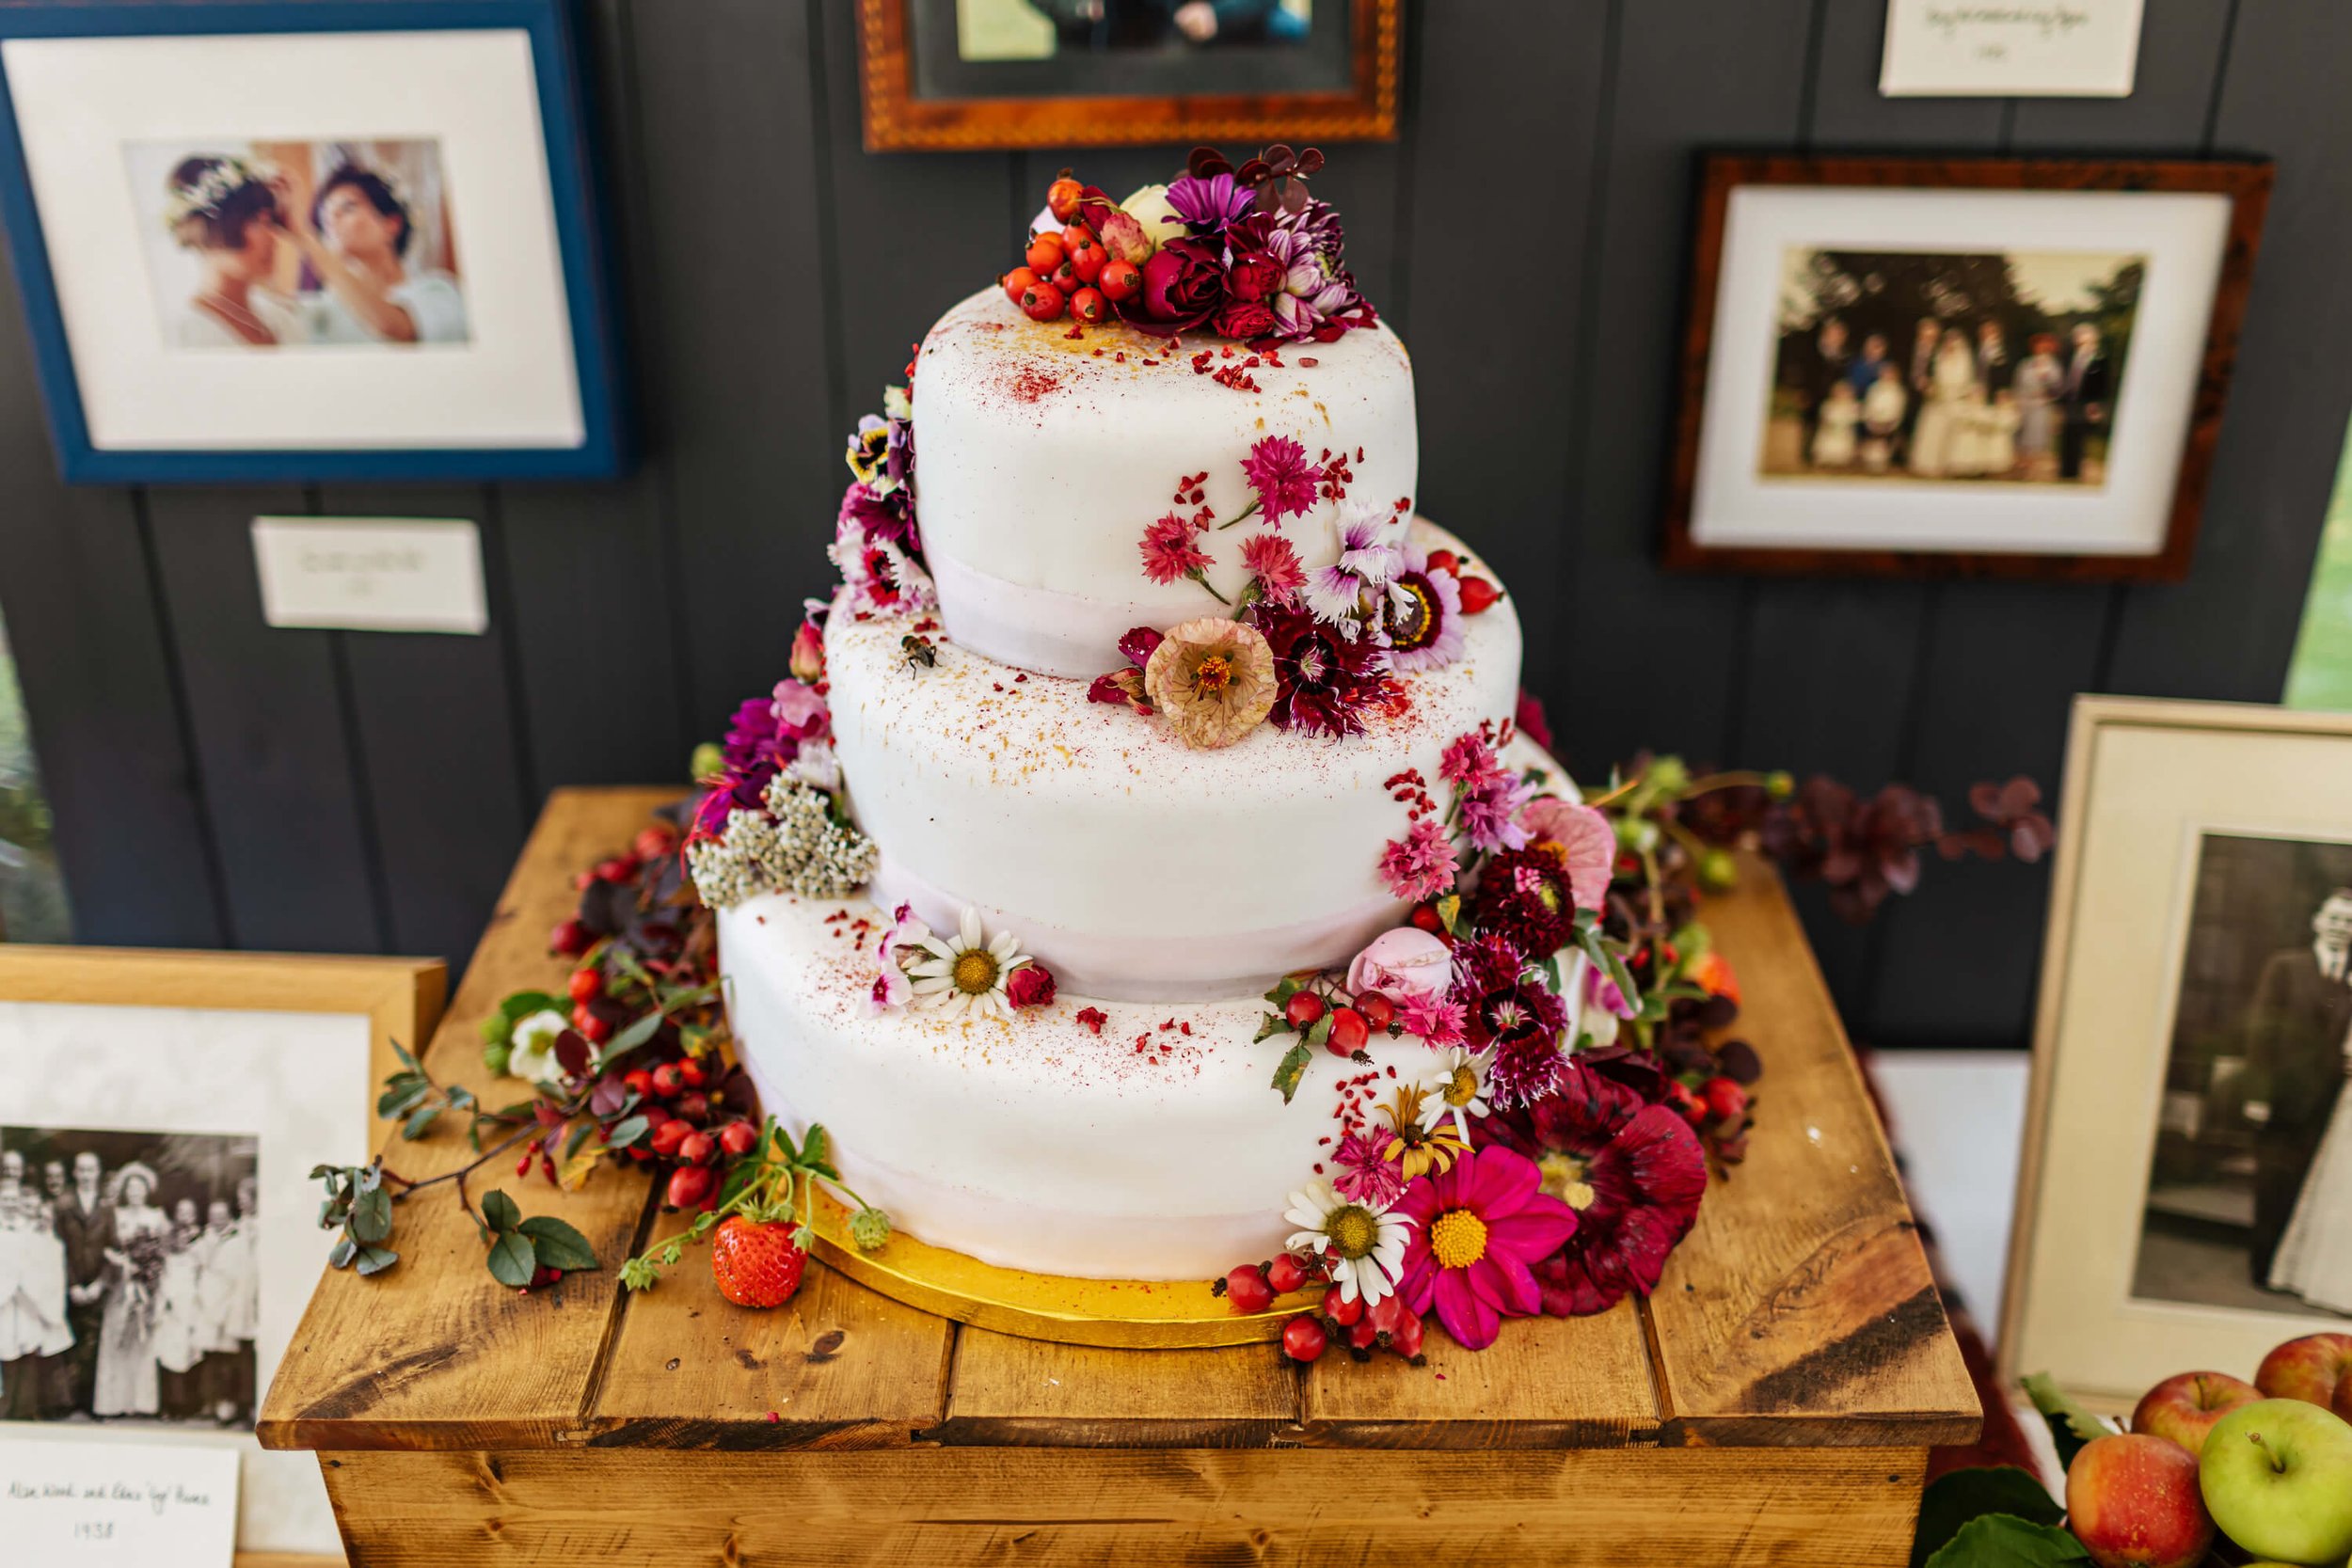 A wedding cake with beautifully decorated with flowers